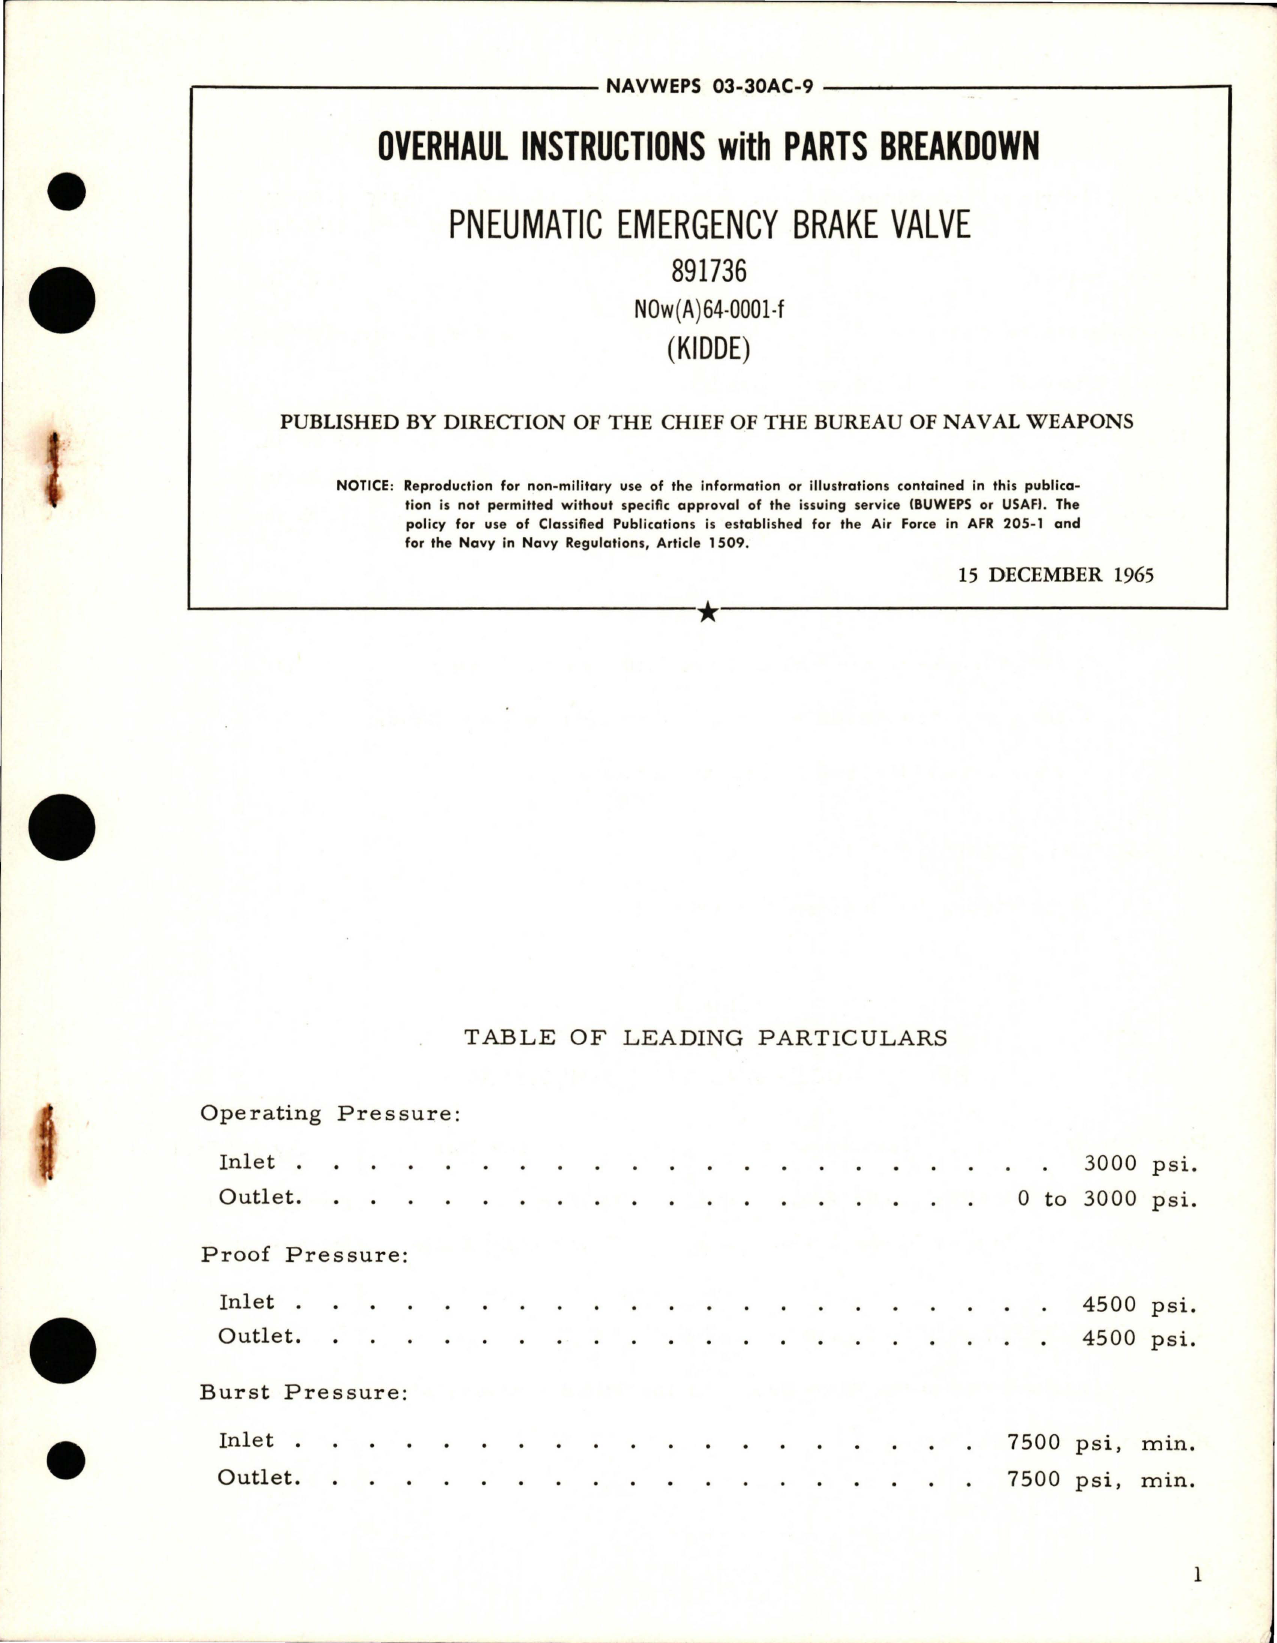 Sample page 1 from AirCorps Library document: Overhaul Instructions with Parts Breakdown for Pneumatic Emergency Brake Valve - 891736